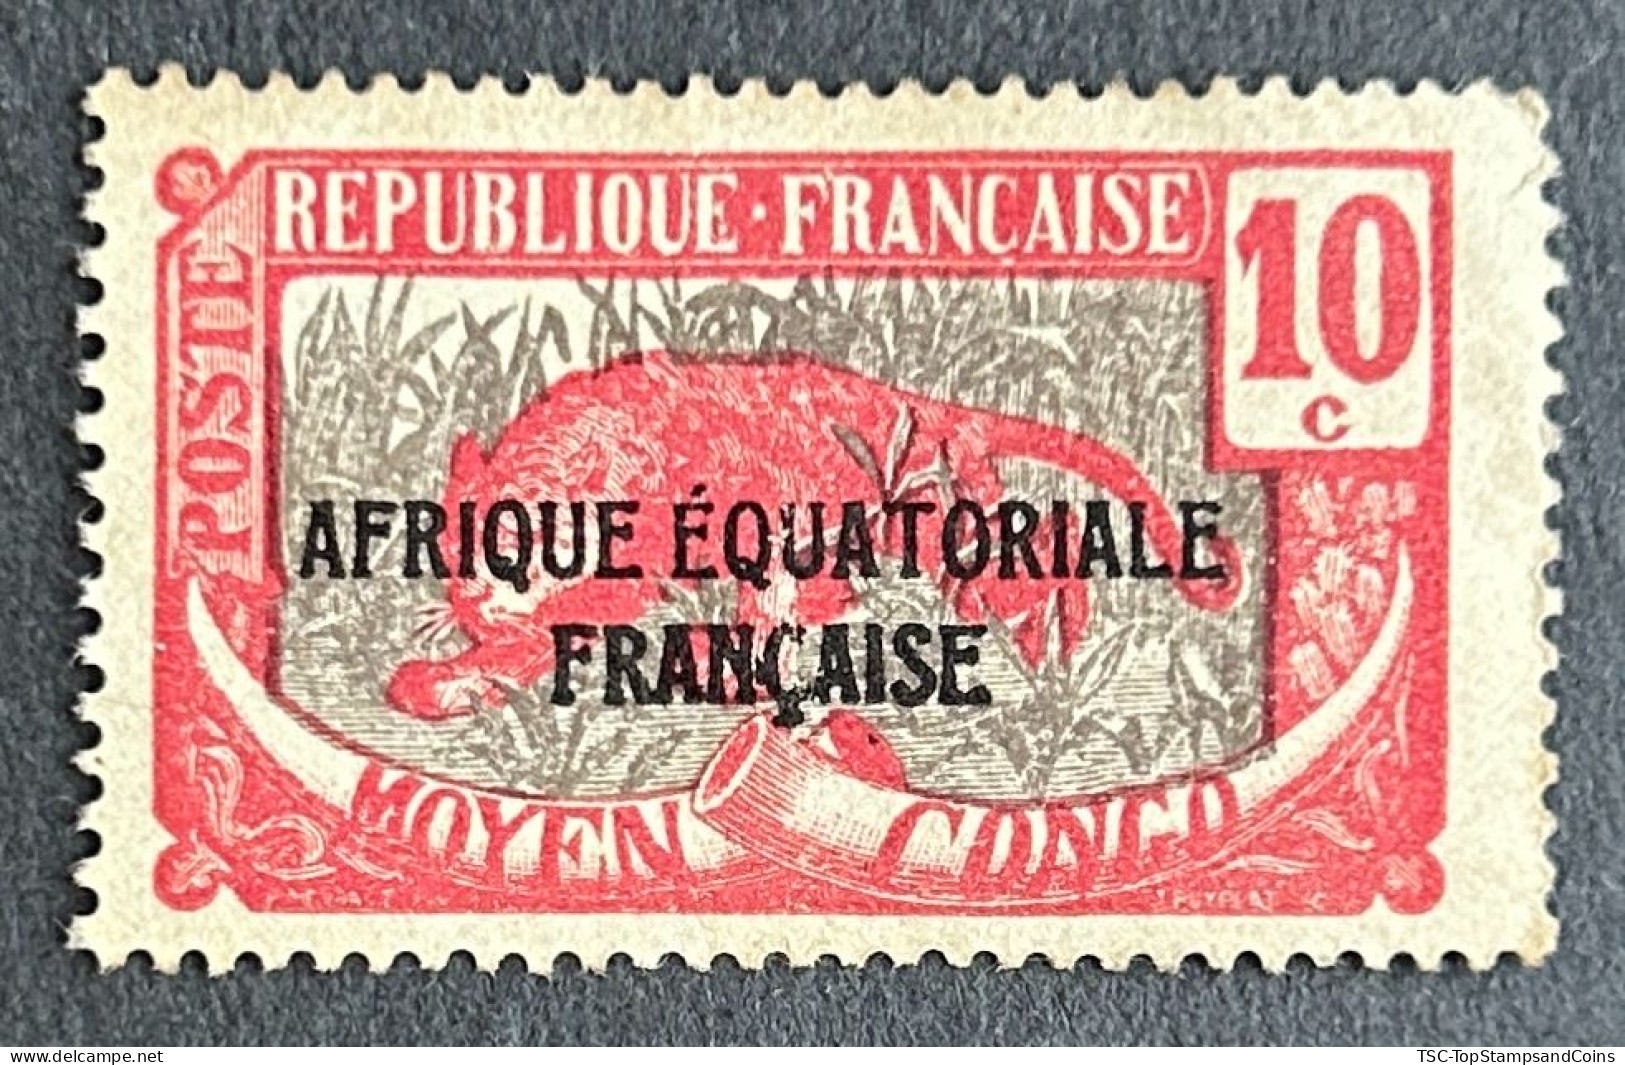 FRCG093U2 - Leopard - Overprinted AEF - 10 C Used Stamp - Middle Congo - 1925 - Used Stamps